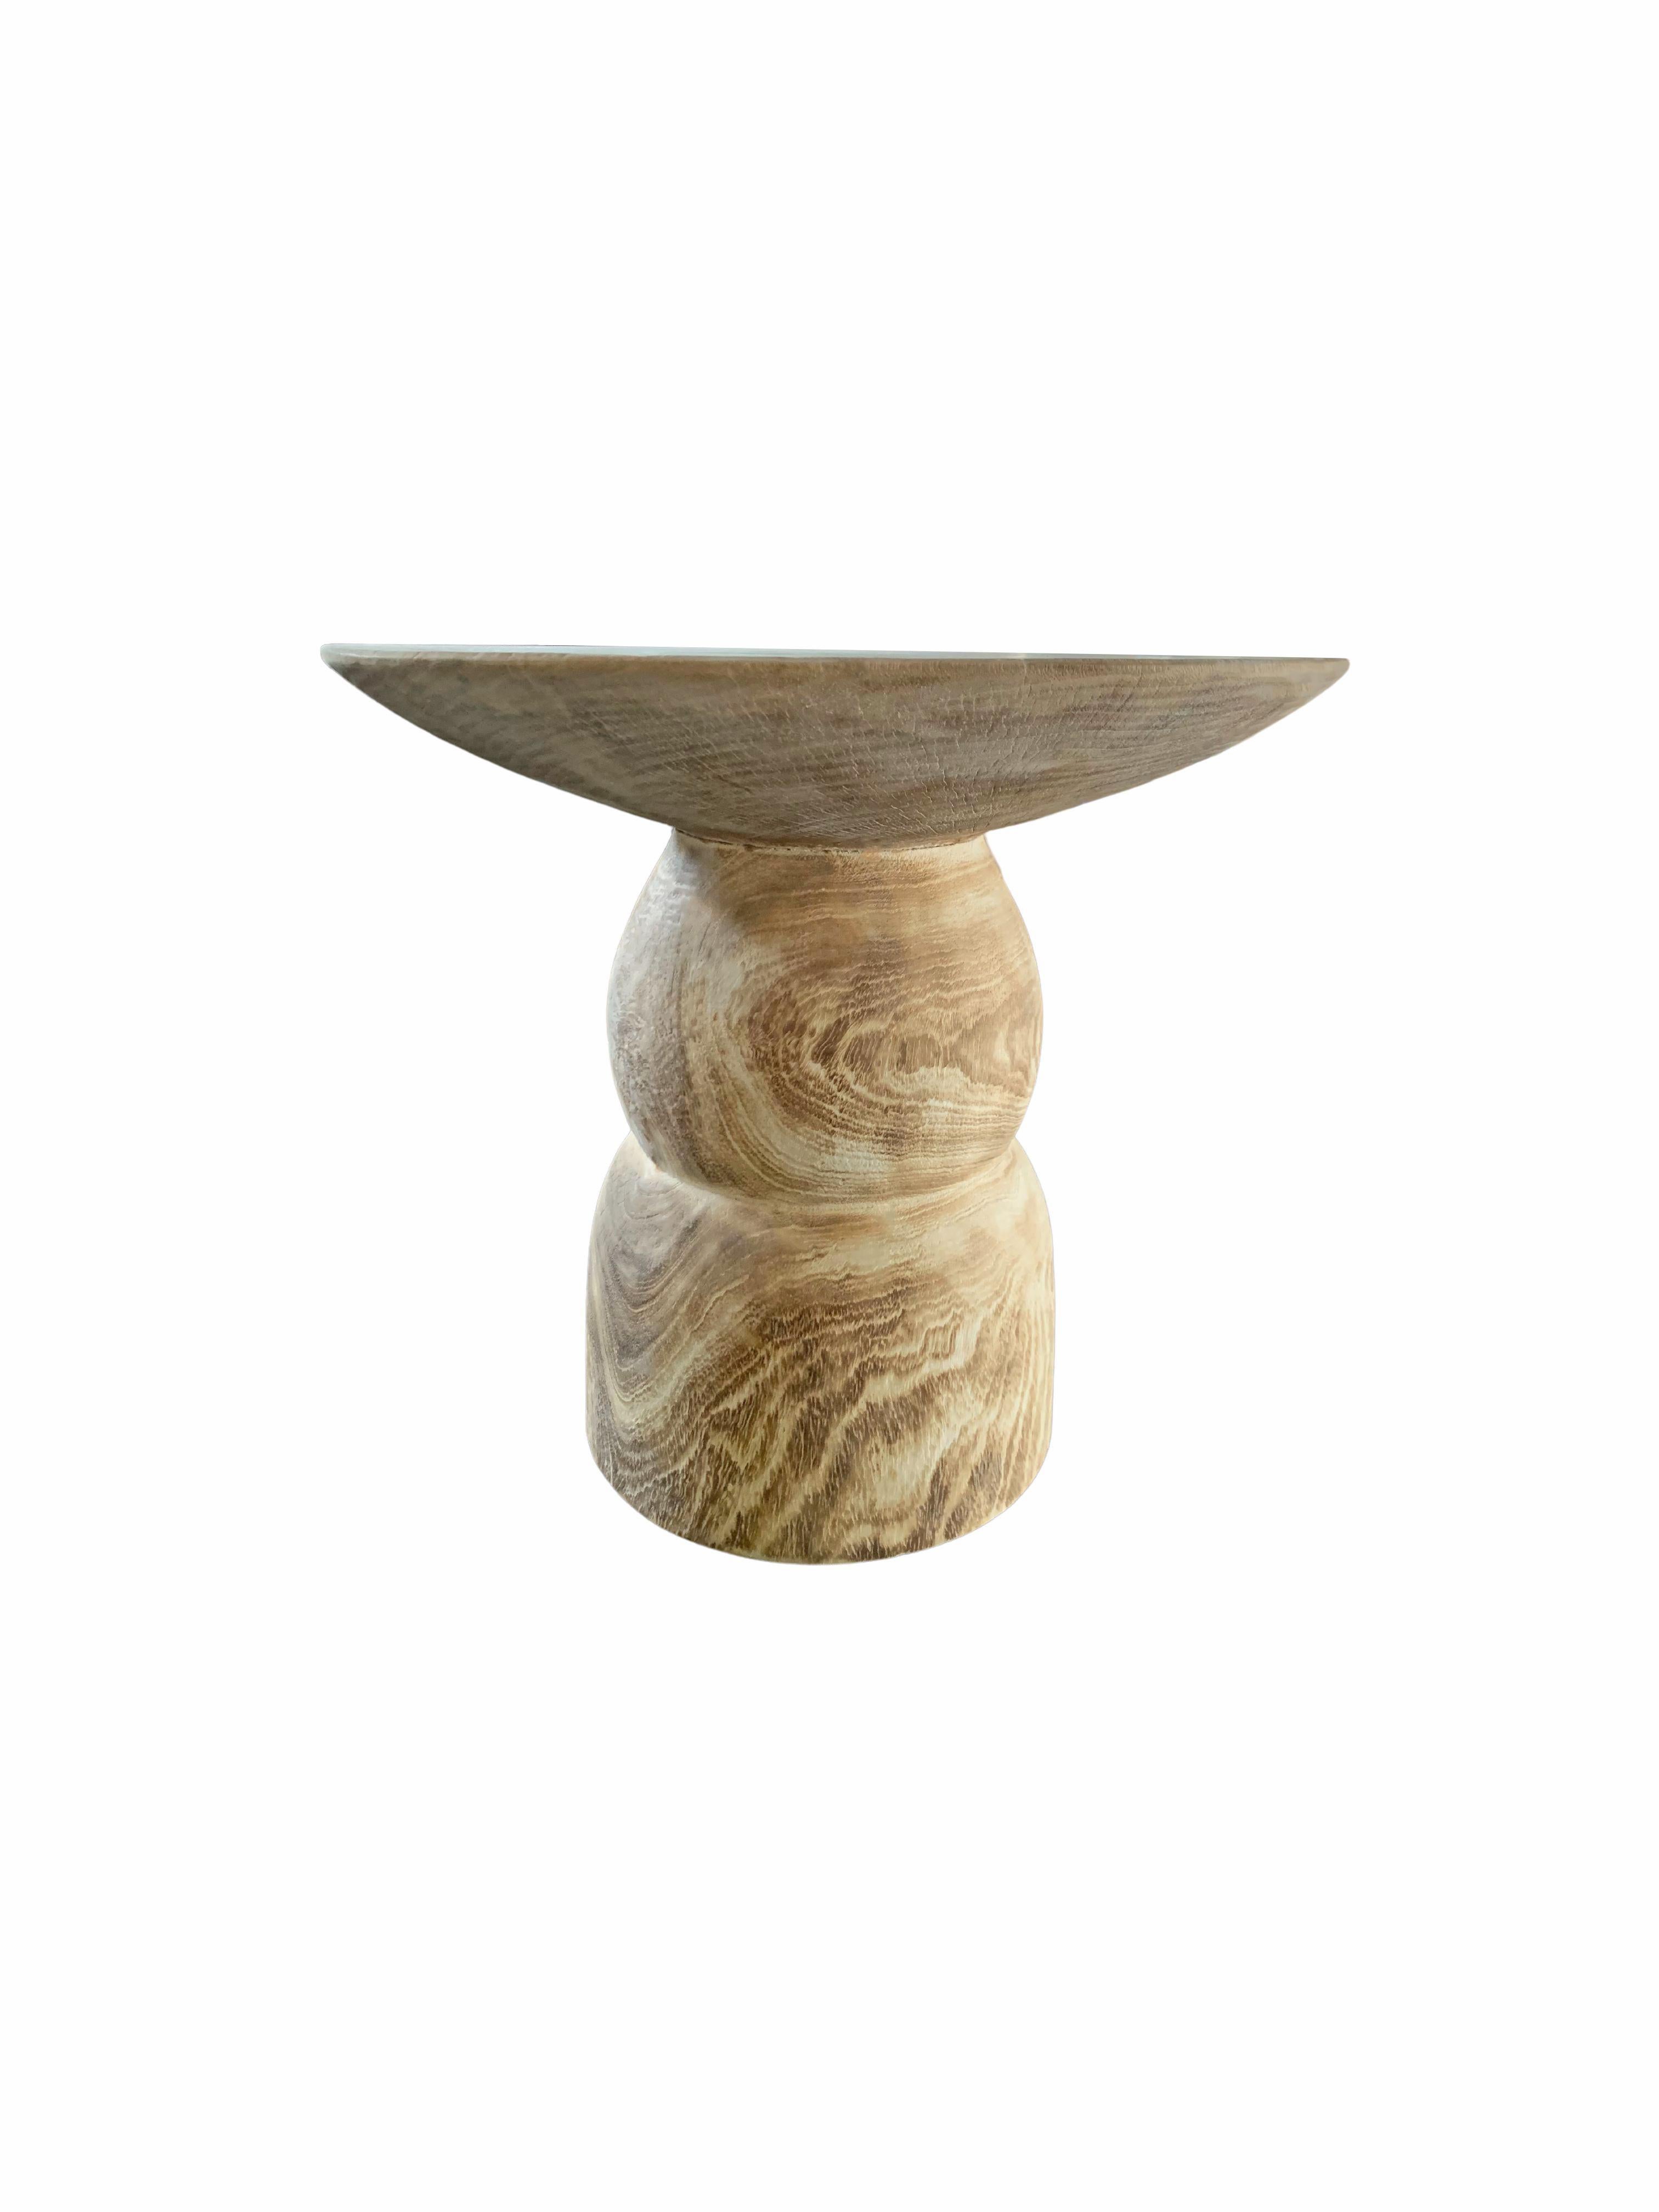 Organic Modern Round Side Table Crafted from Mango Wood Bleached Finish For Sale